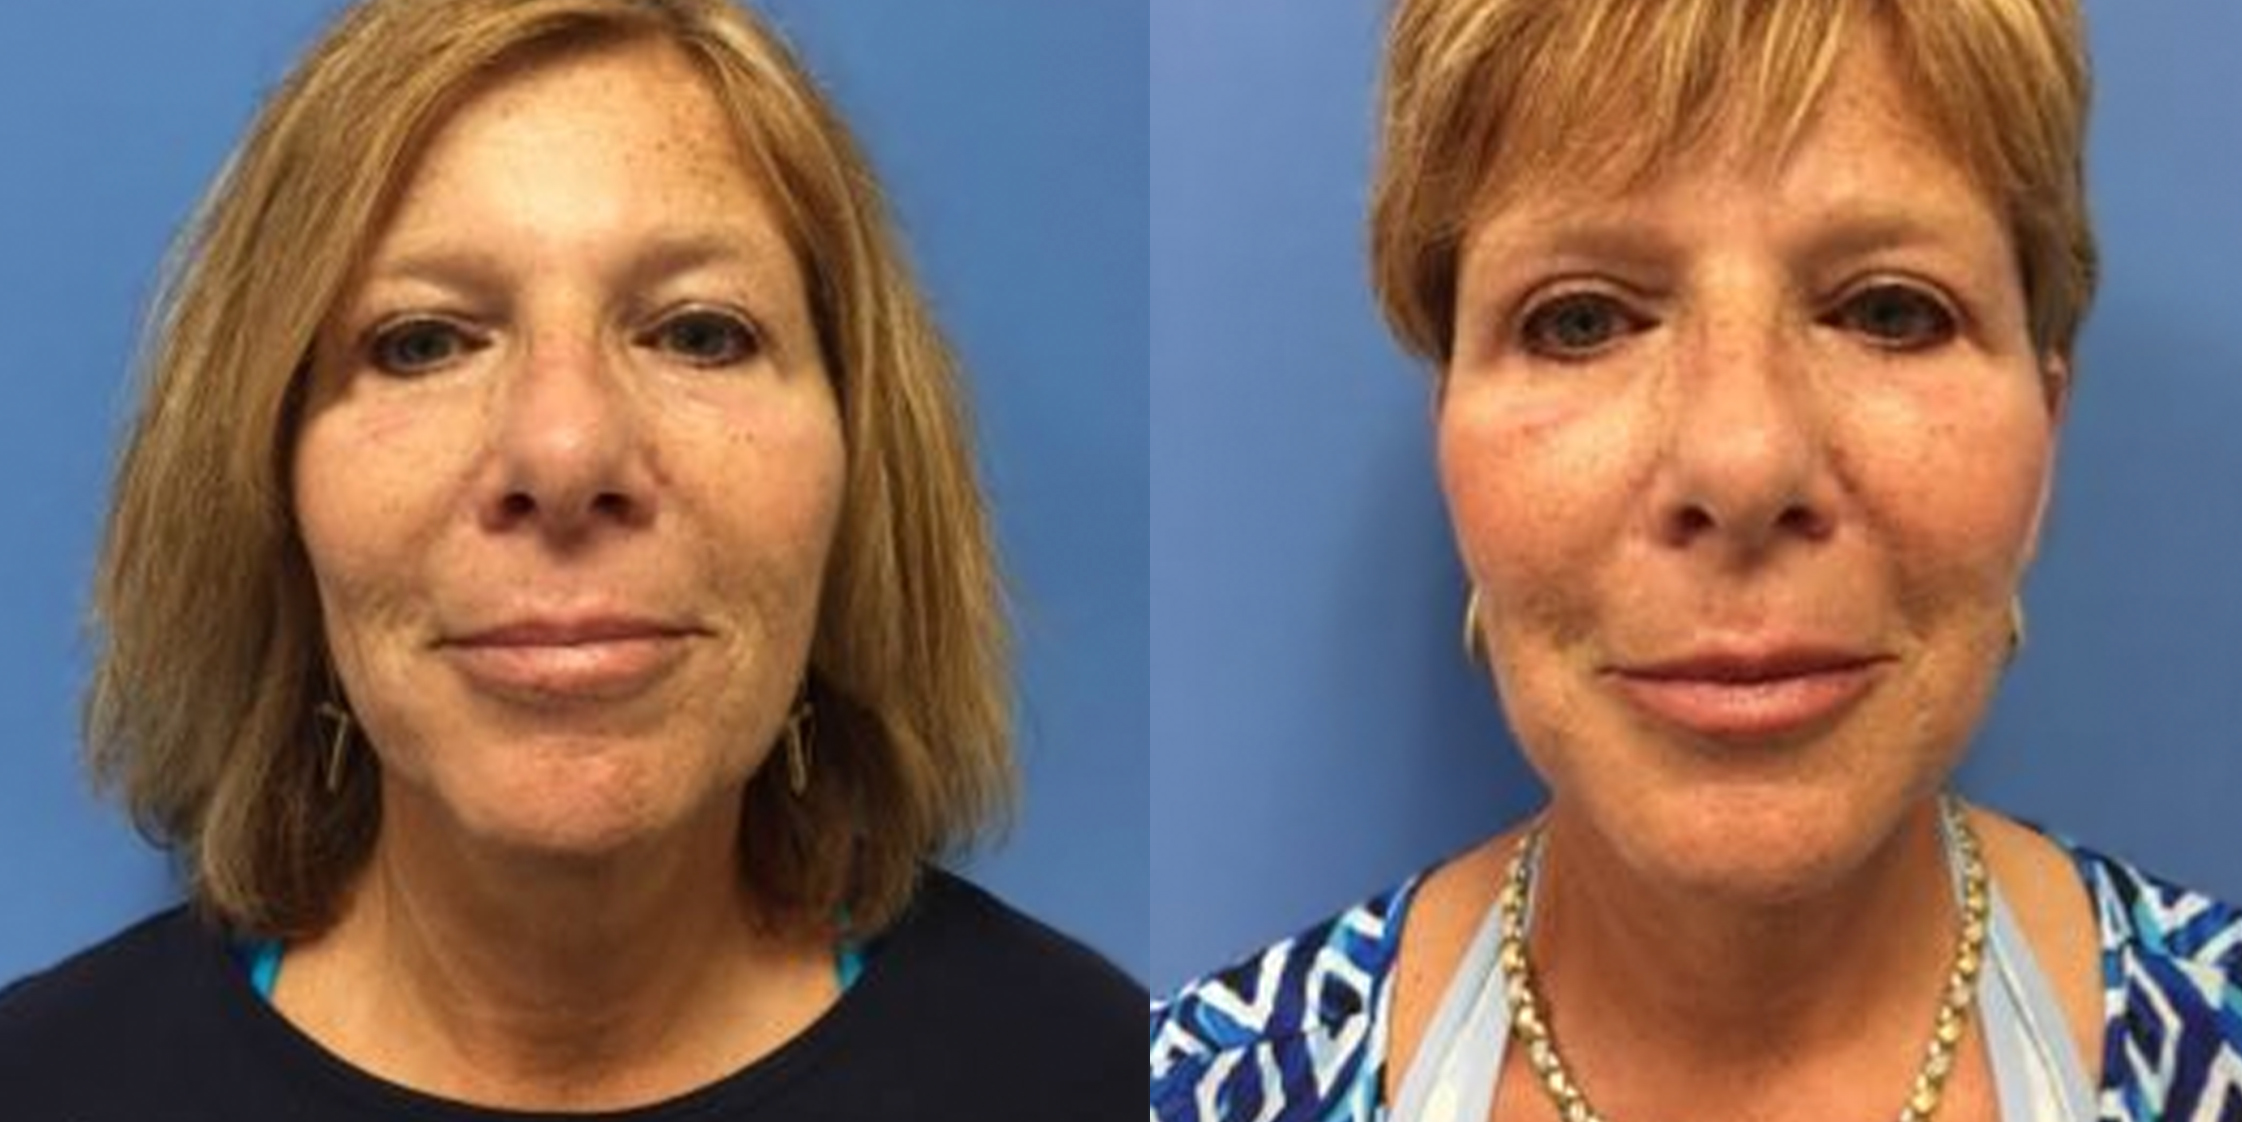 Hess-Sandeen-Facelift-Tucson-before-after18-1024x683